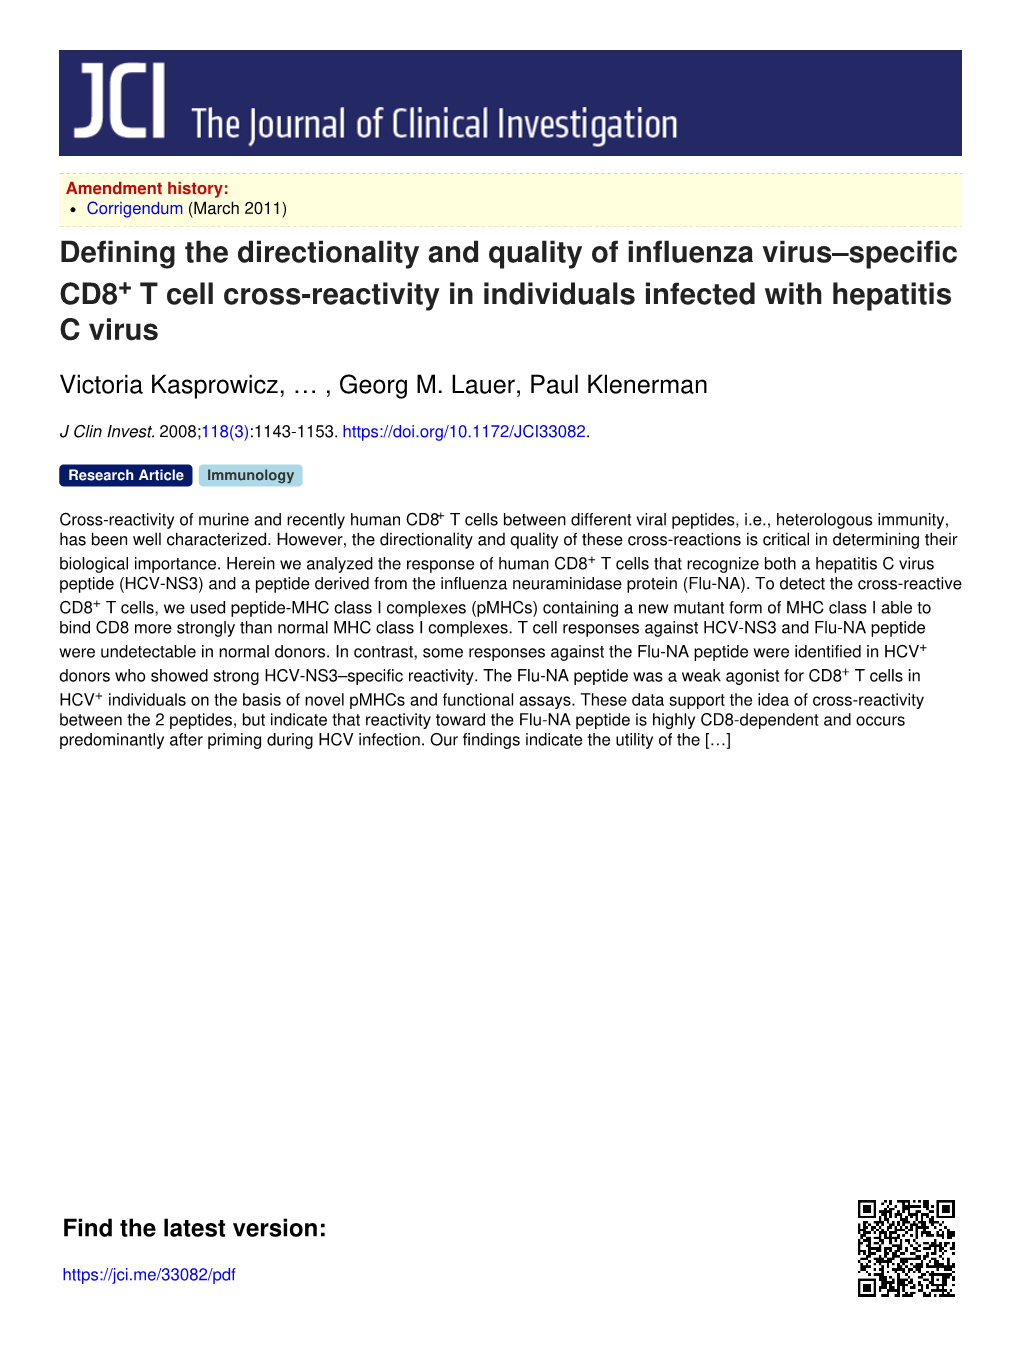 Defining the Directionality and Quality of Influenza Virus–Specific CD8+ T Cell Cross-Reactivity in Individuals Infected with Hepatitis C Virus